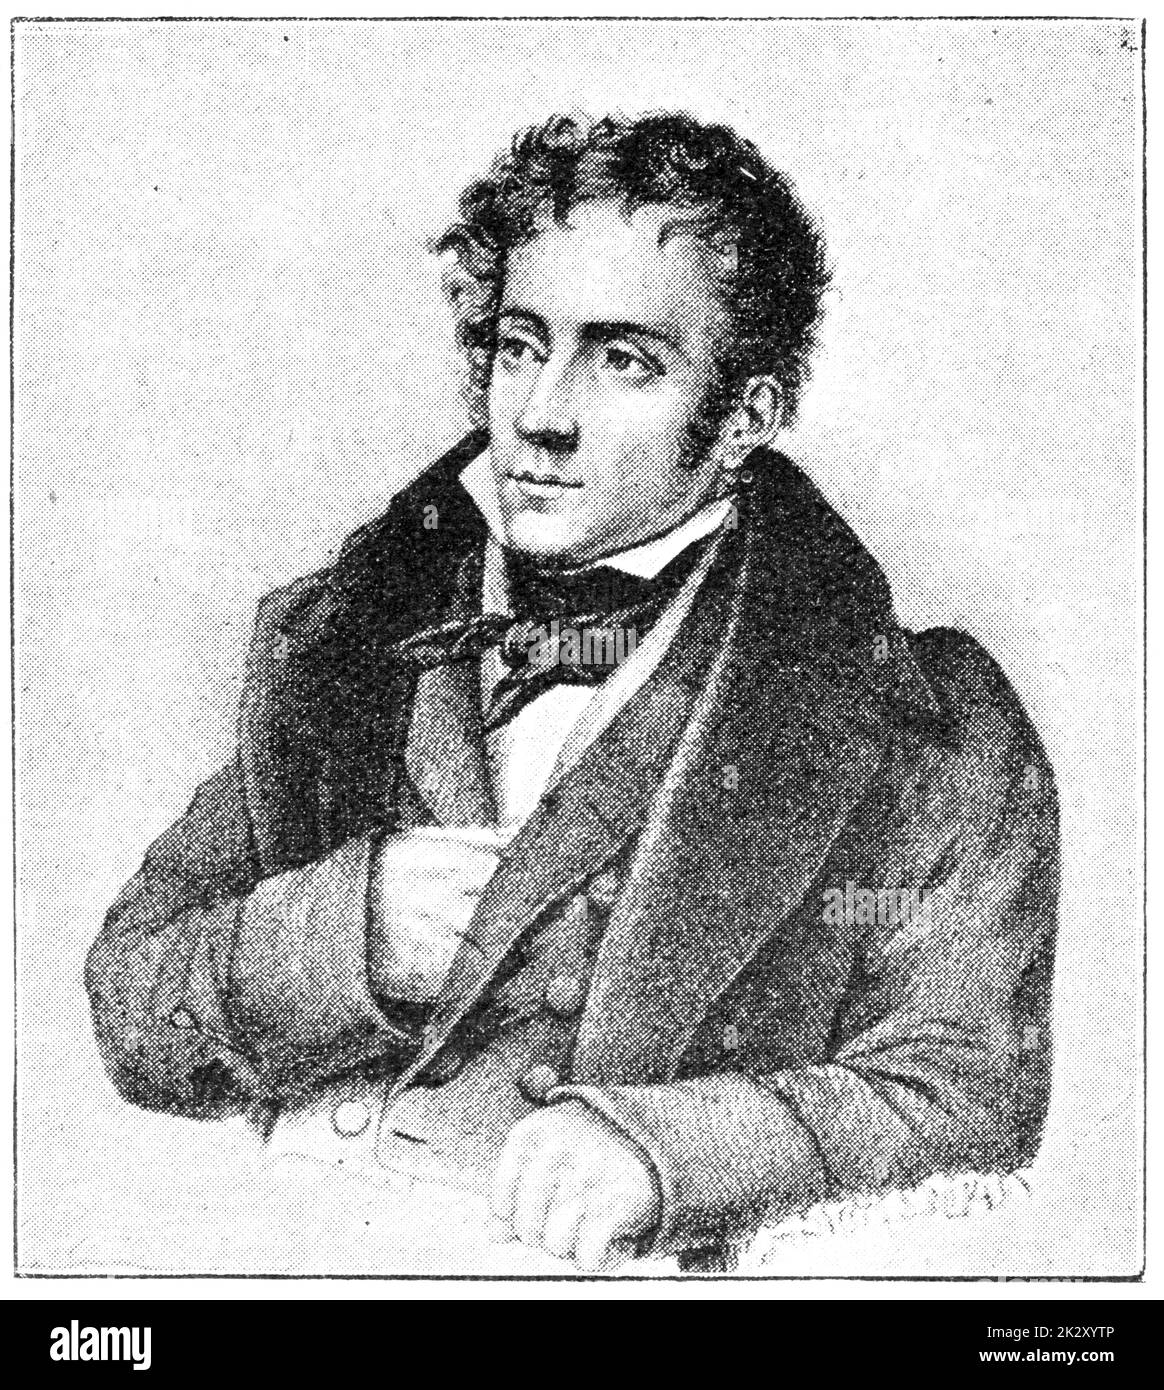 Portrait of Francois-Rene de Chateaubriand - a French writer, politician, diplomat and historian. Illustration of the 19th century. White background. Stock Photo